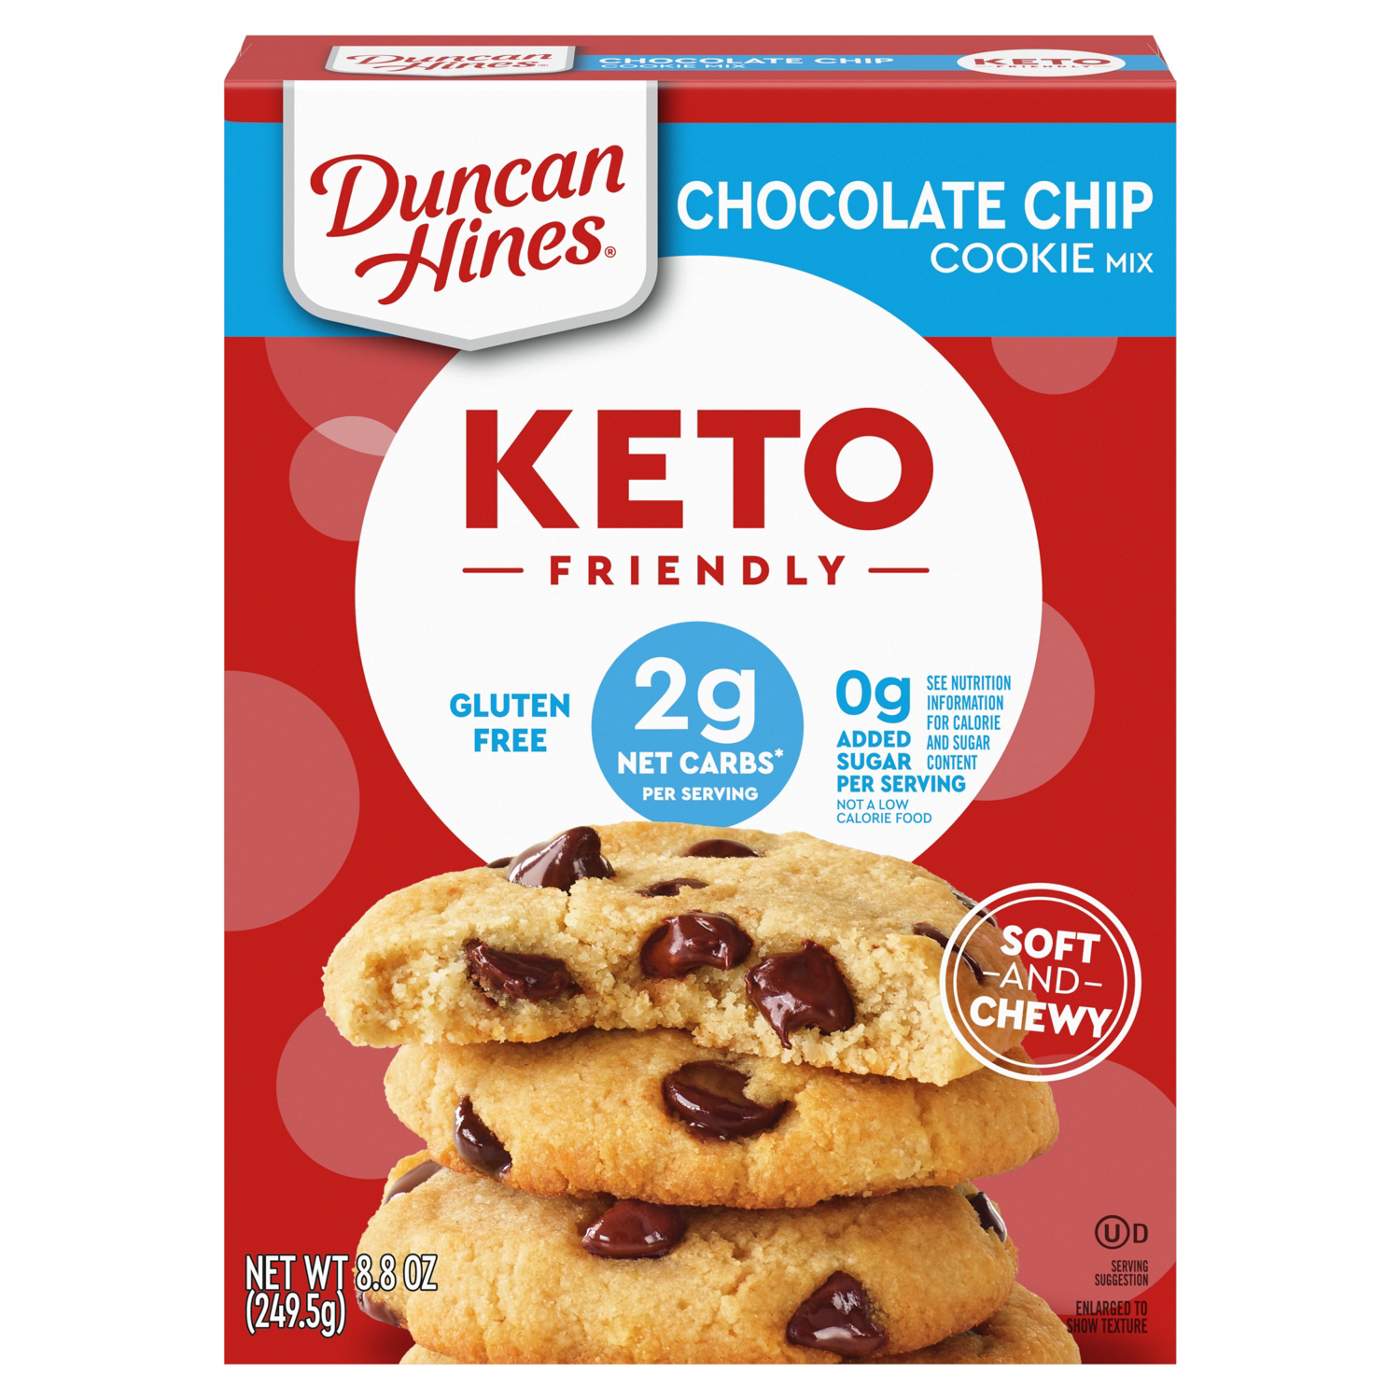 Duncan Hines Keto Friendly Chocolate Chip Cookie Mix; image 1 of 7